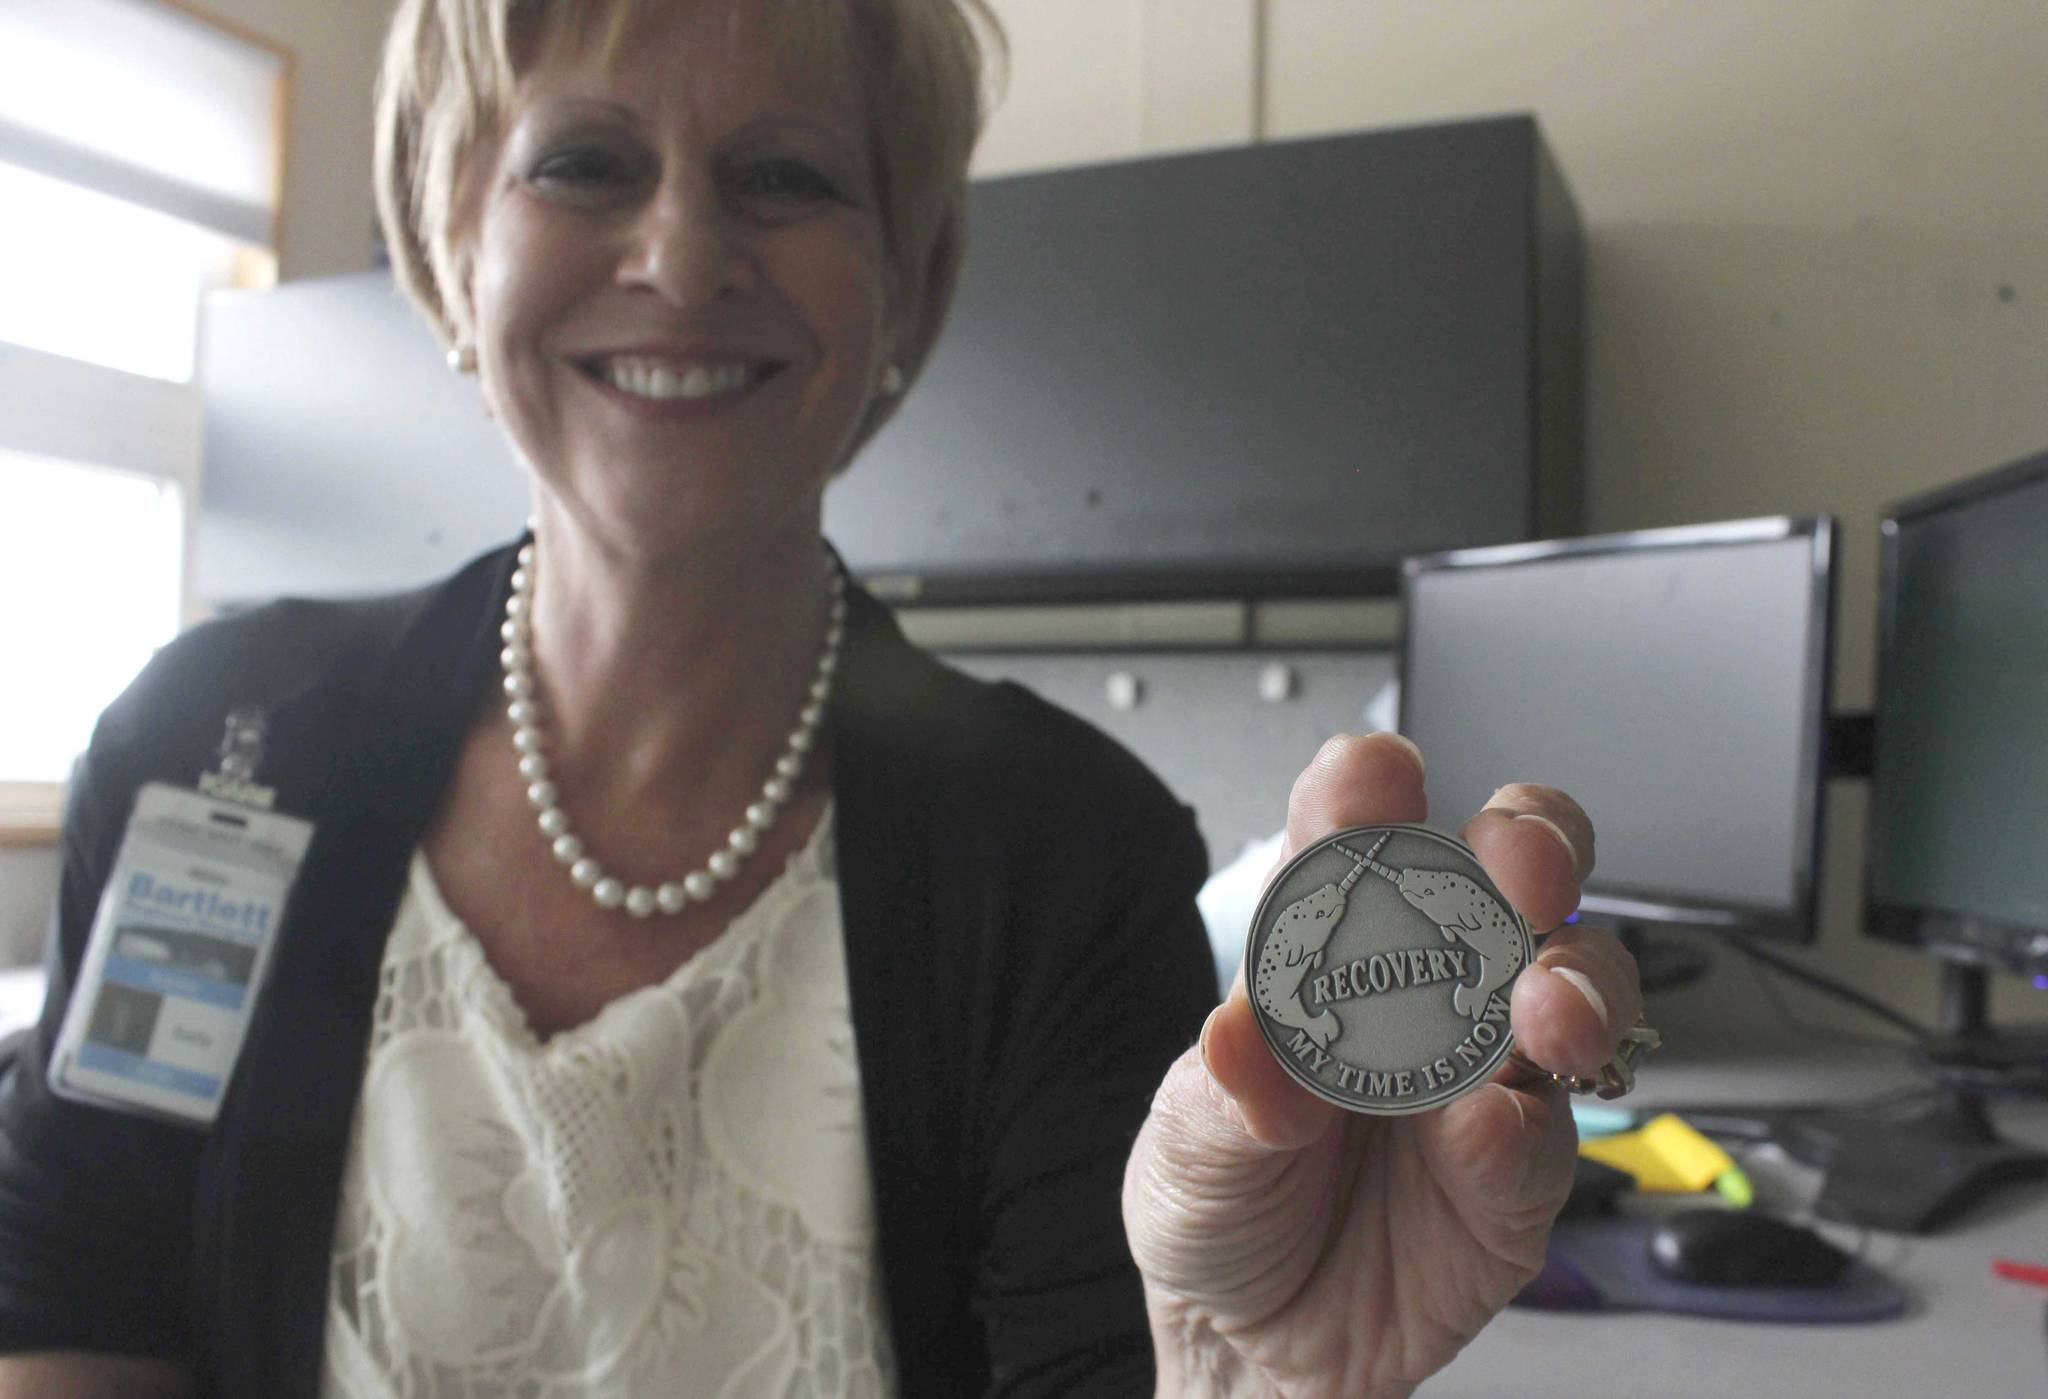 Sally Anne Schneider, departing her position as Chief Behavioral Health Officer at Bartlett Regional Hospital, holds a coin given to patients who complete a program at Rainforest Recovery Center. Schneider says the state of mental health and addiction treatment in Juneau is slowly improving and she’s hopeful for the future. (Alex McCarthy | Juneau Empire)